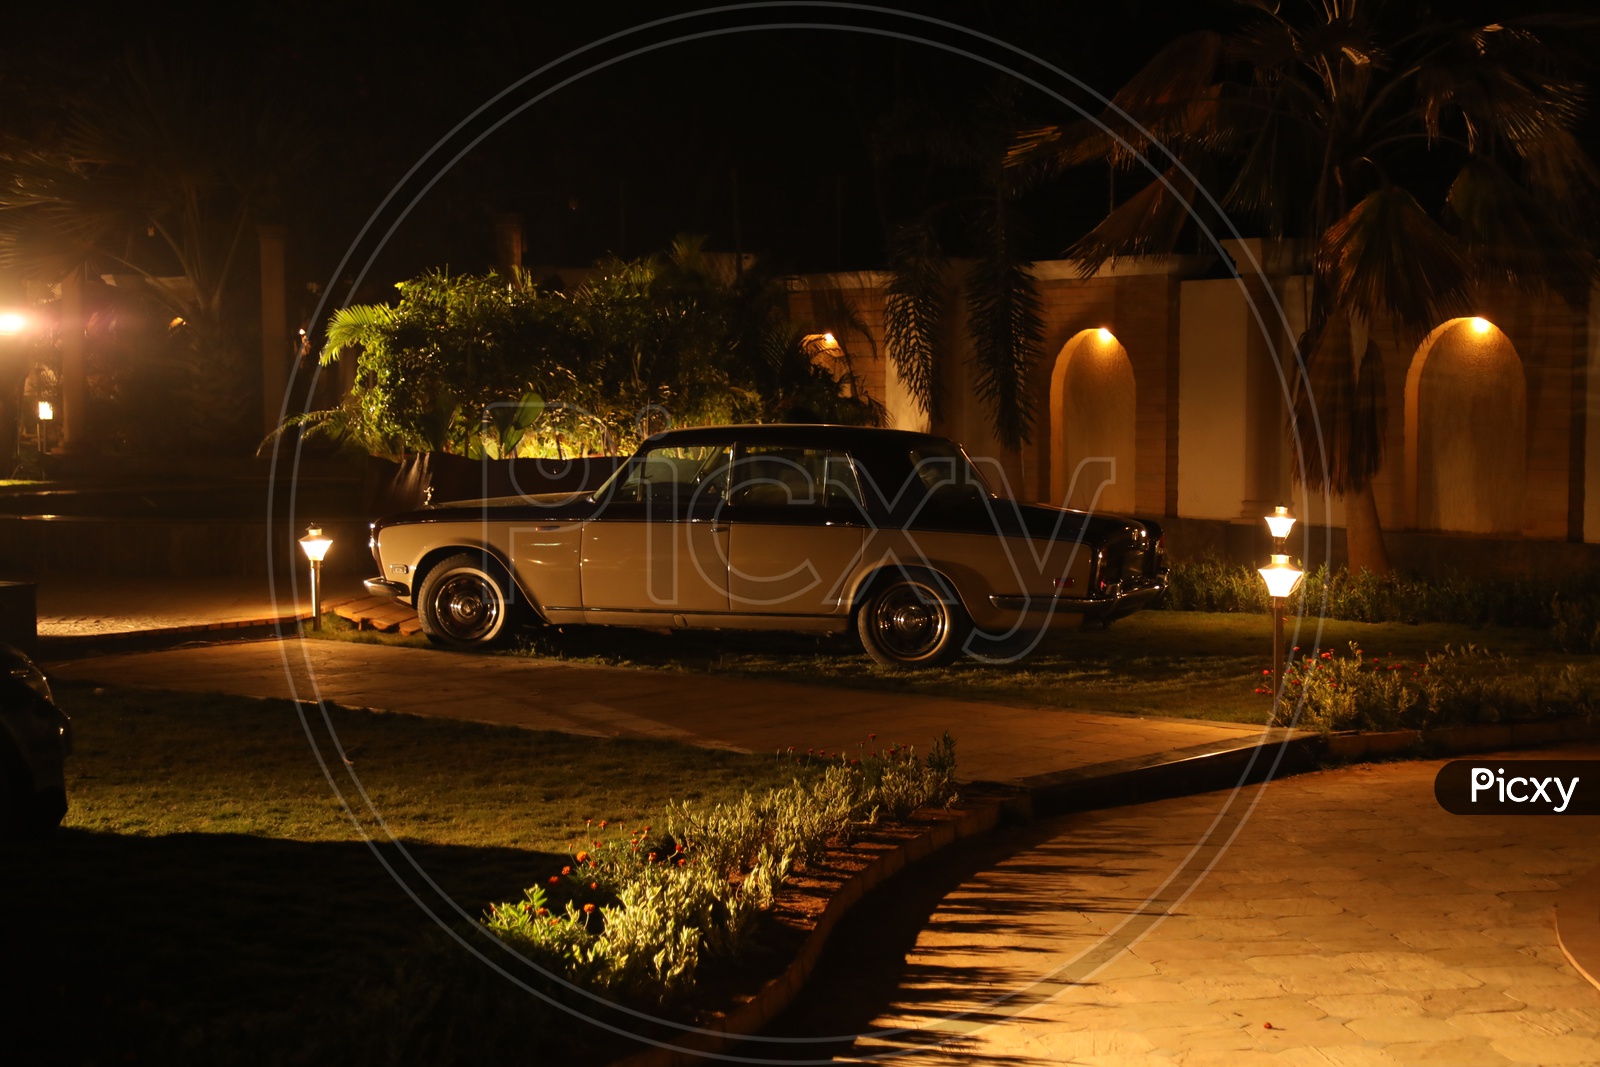 Antique Car Parked In a House Lawn